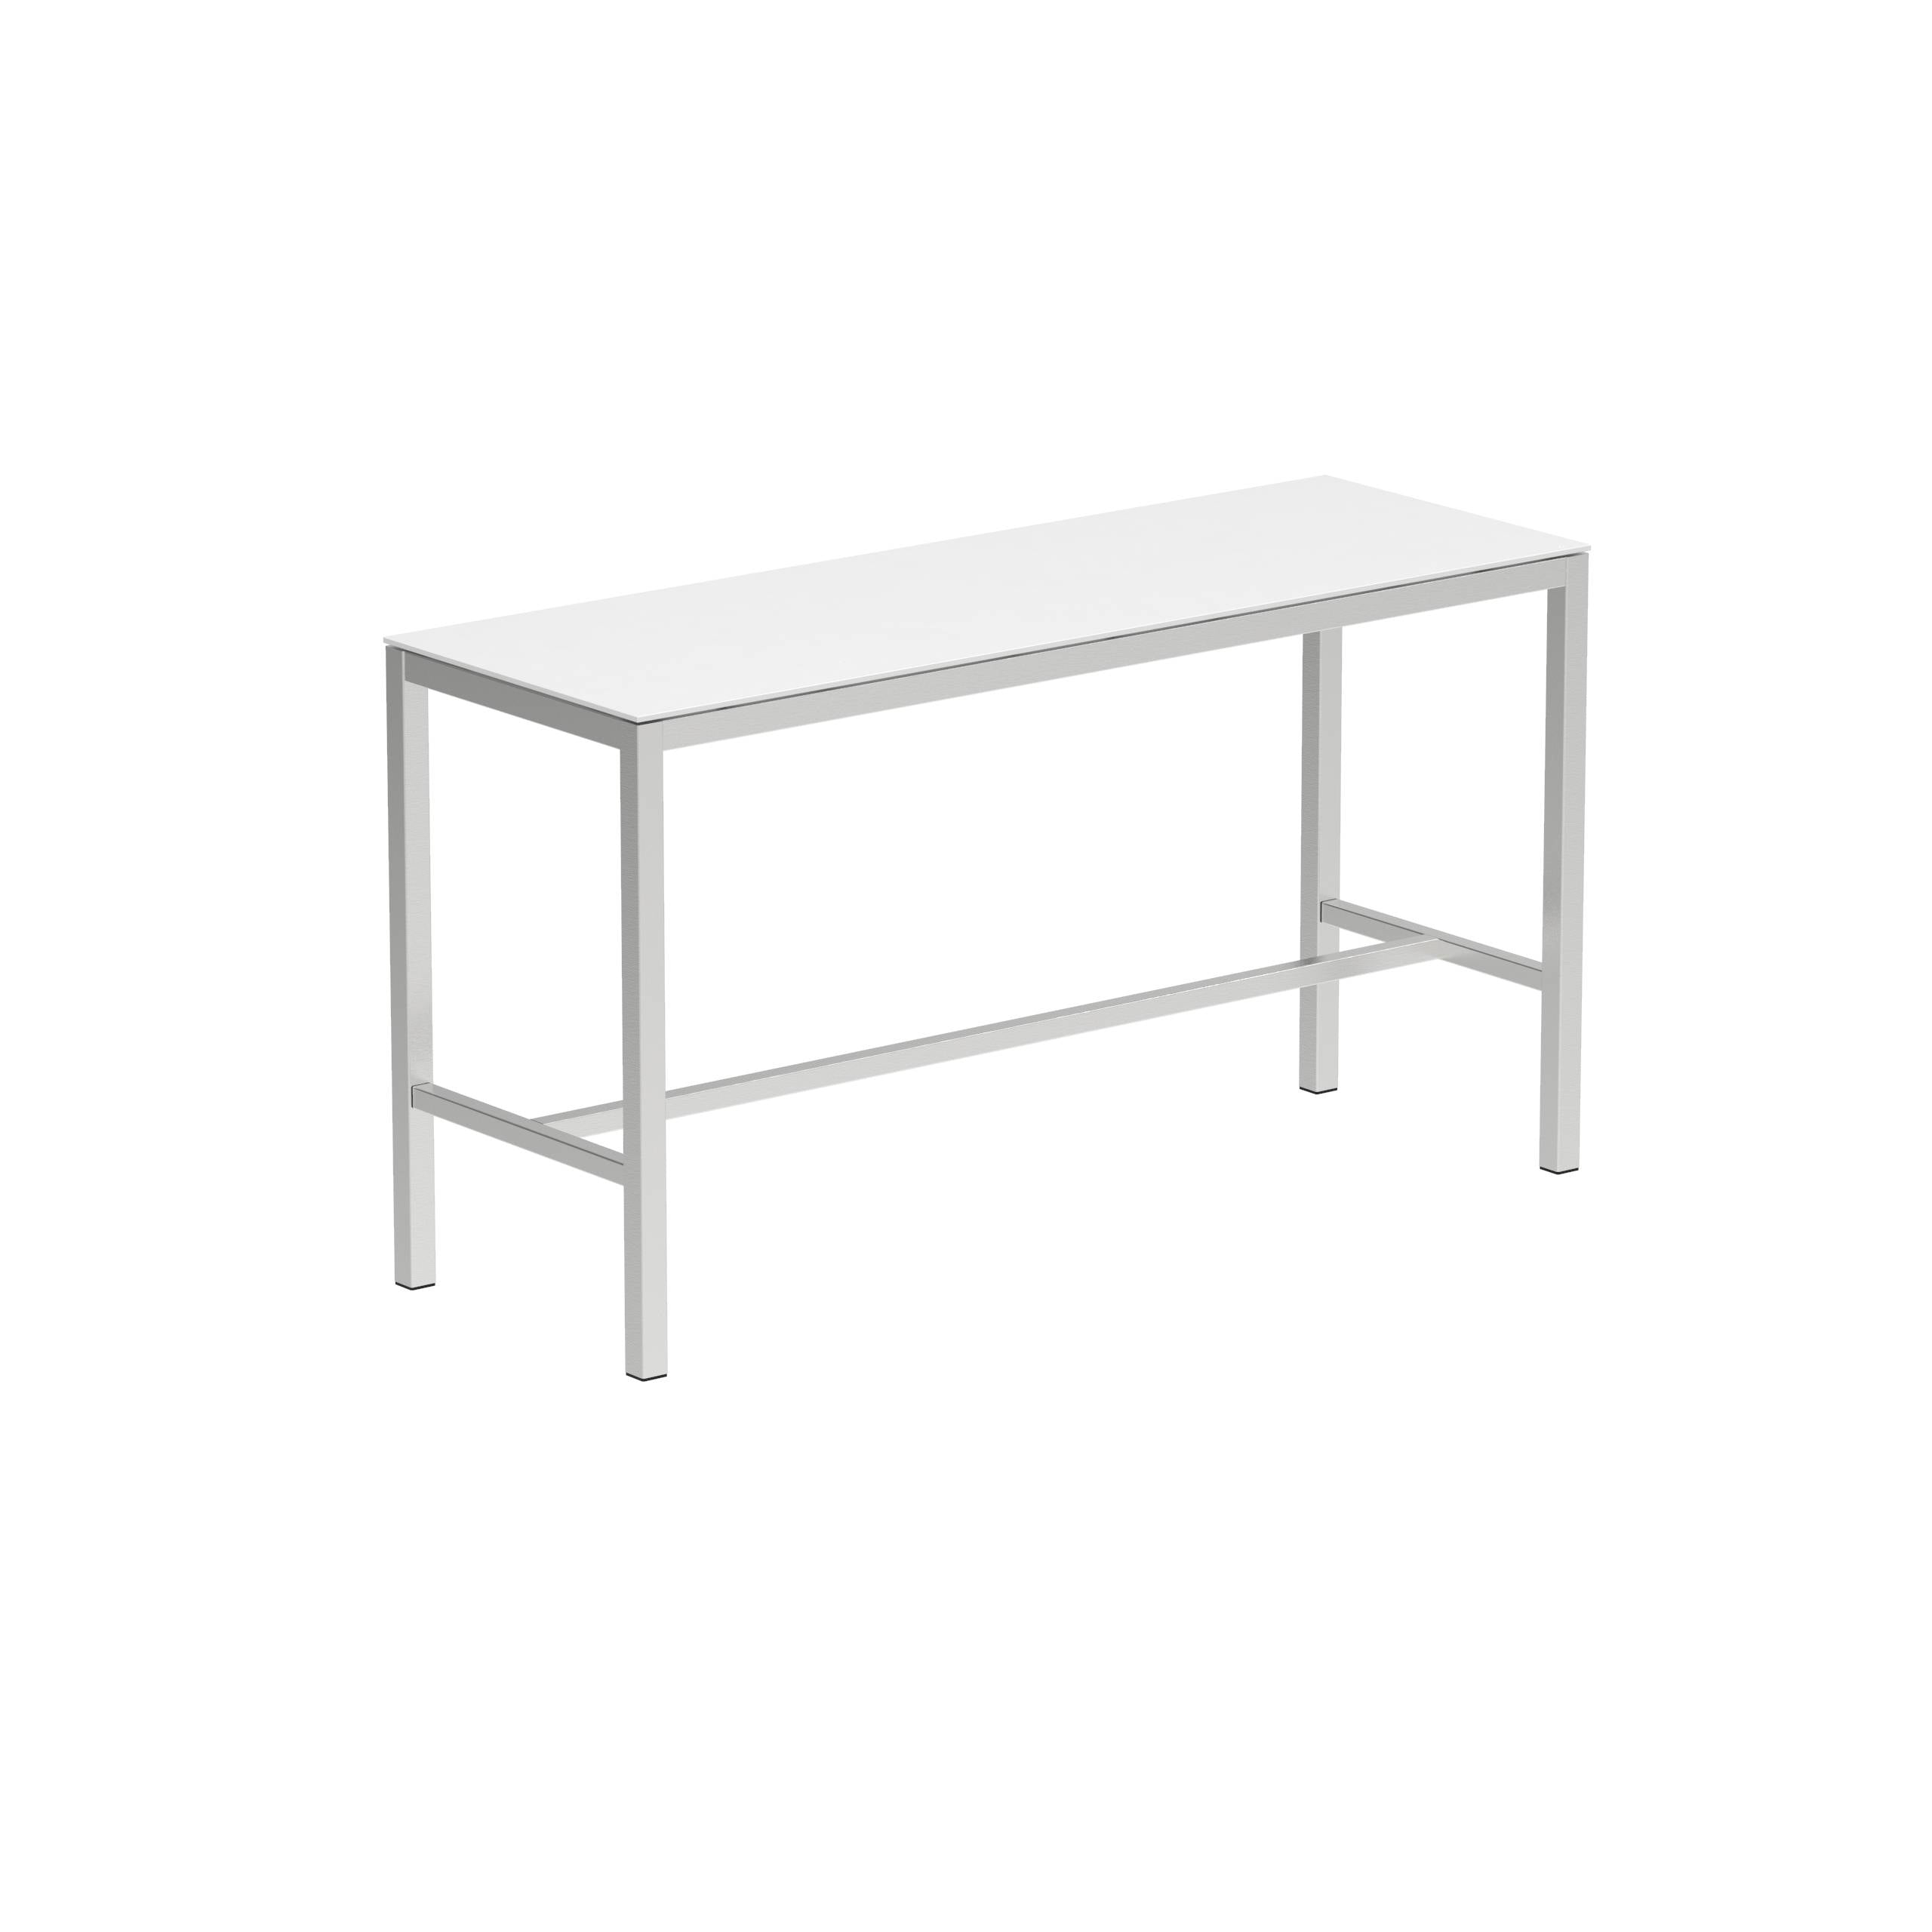 Taboela High Table 200x70cm Ss With Top Ceramic White